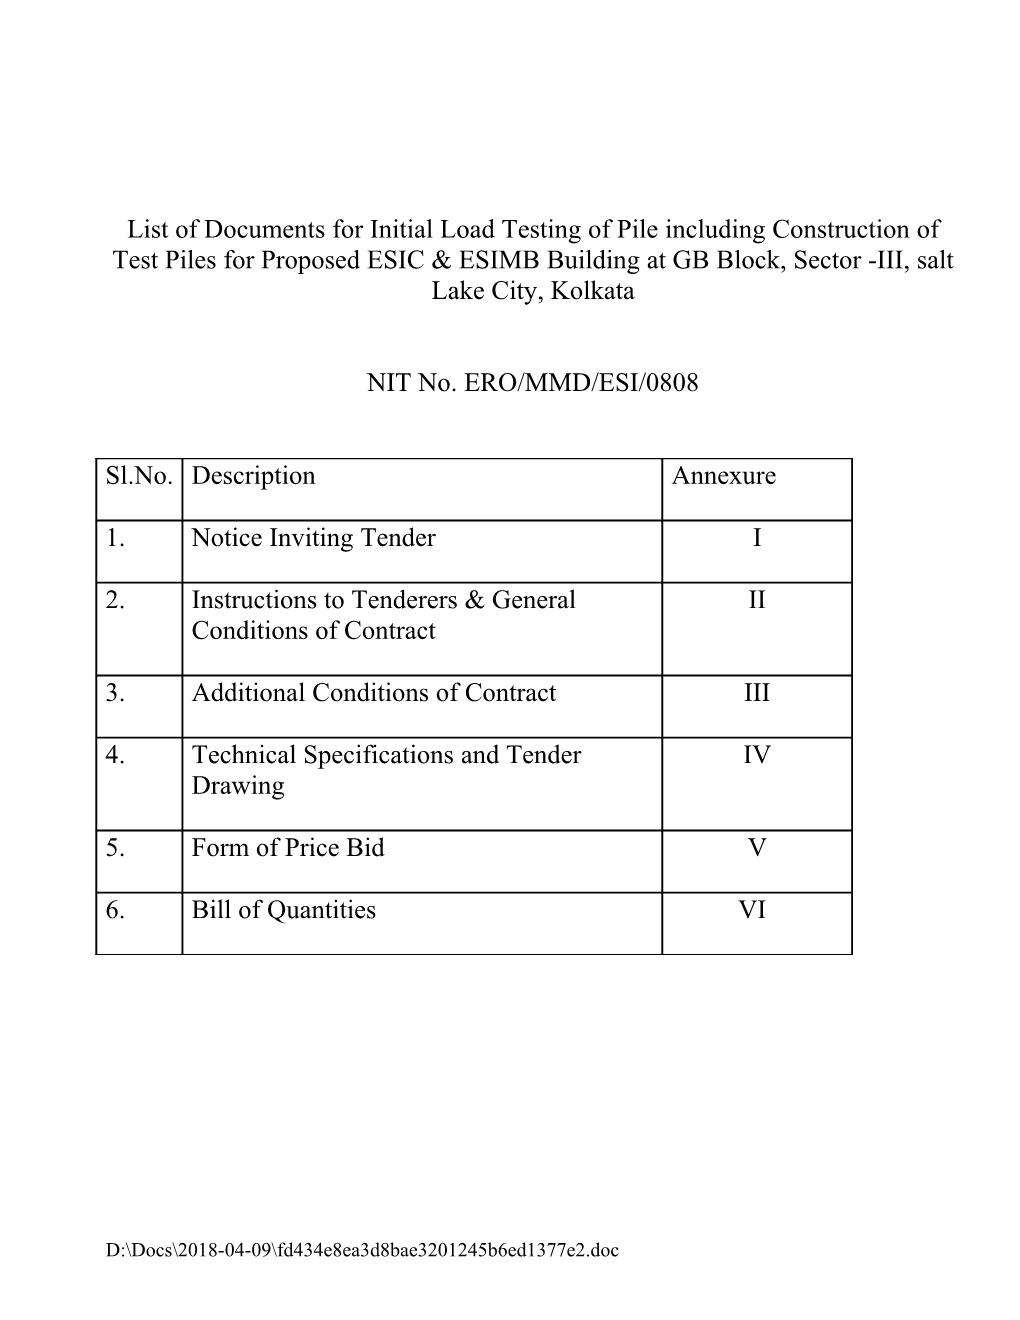 List of Documents for Initial Load Testing of Pile Including Construction of Test Pipes